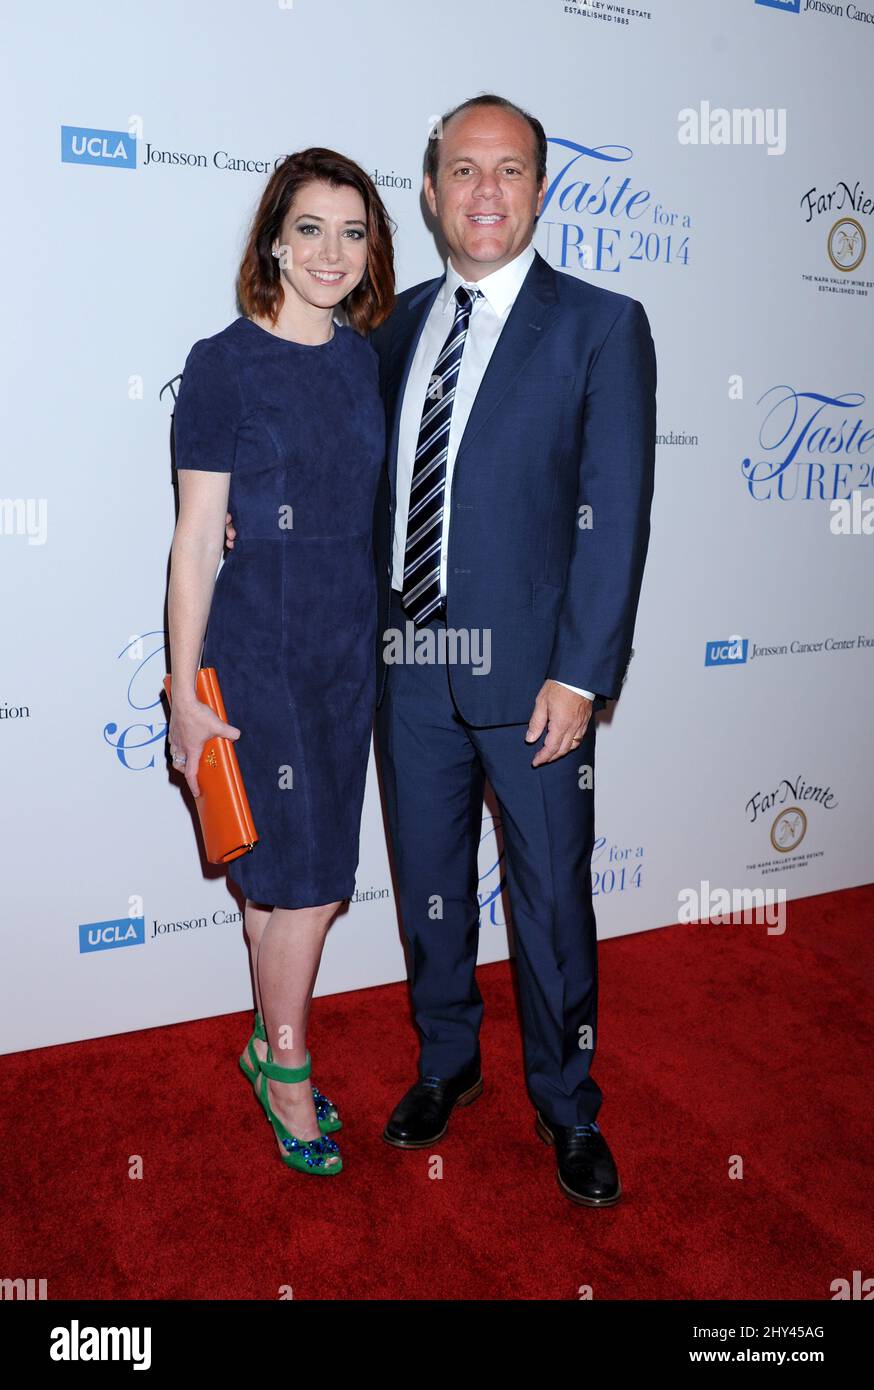 Alyson hannigan and tom papa hi-res stock photography and images - Alamy